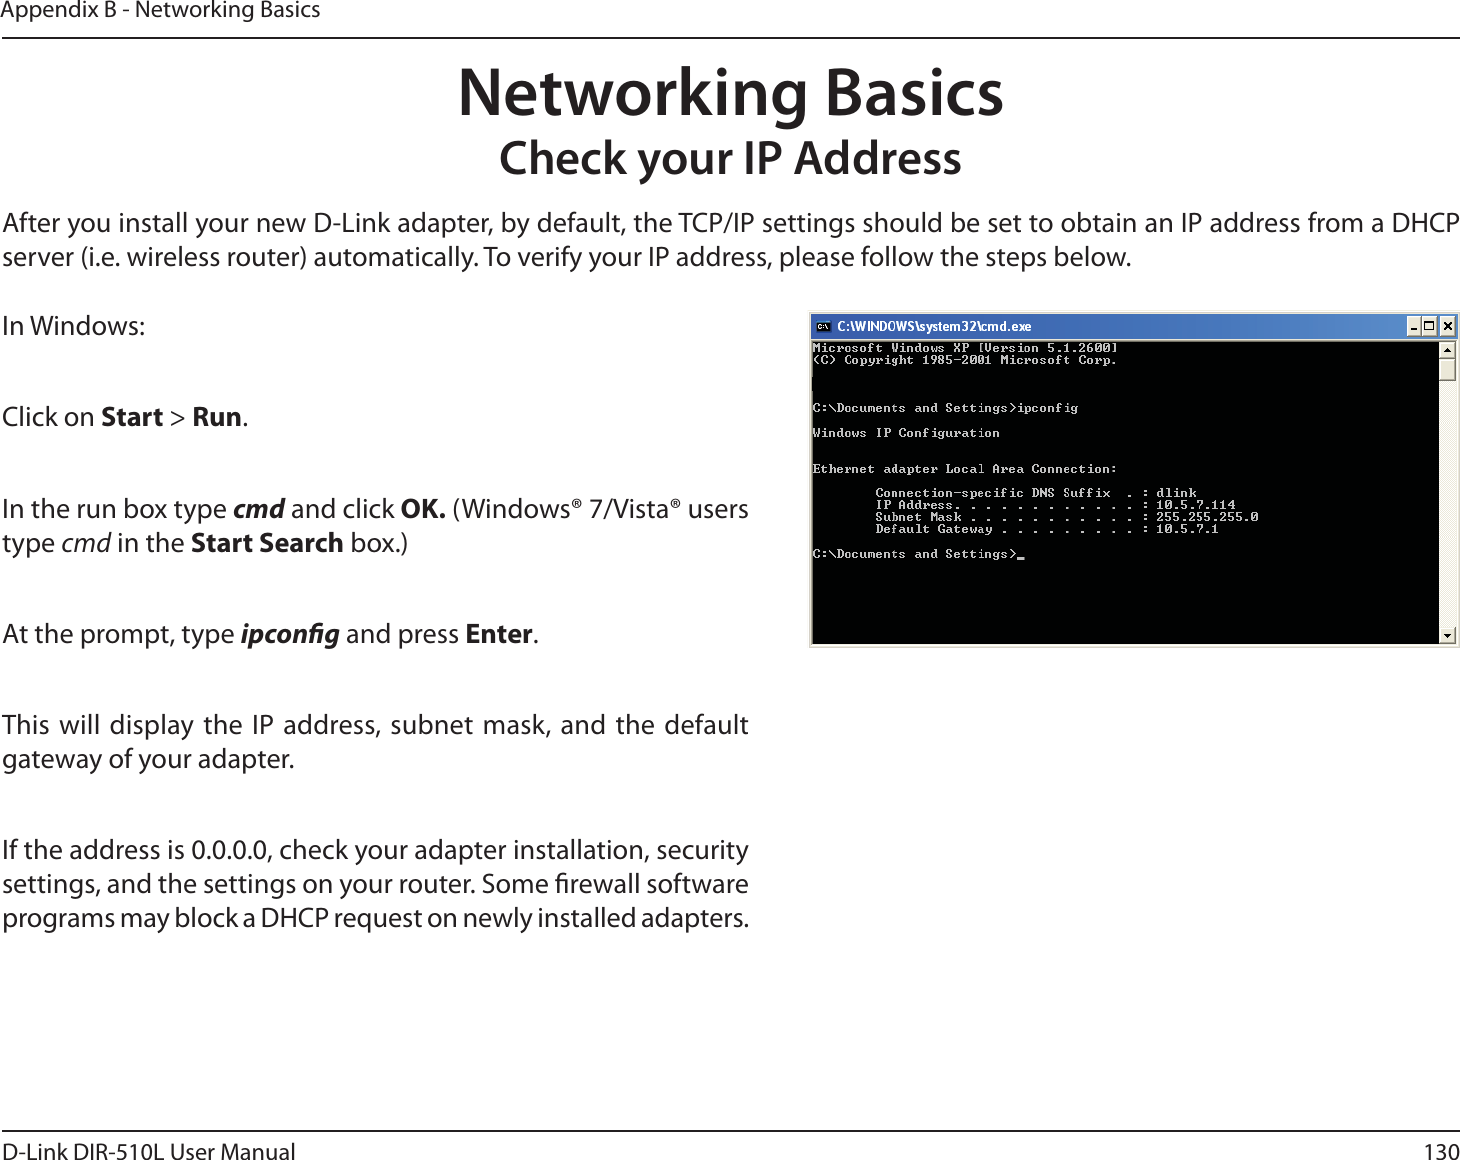 130D-Link DIR-510L User ManualAppendix B - Networking BasicsNetworking BasicsCheck your IP AddressIn Windows:Click on Start &gt; Run.In the run box type cmd and click OK. (Windows® 7/Vista® users type cmd in the Start Search box.)At the prompt, type ipcong and press Enter.This will display the IP address, subnet mask, and the default gateway of your adapter.If the address is 0.0.0.0, check your adapter installation, security settings, and the settings on your router. Some rewall software programs may block a DHCP request on newly installed adapters. After you install your new D-Link adapter, by default, the TCP/IP settings should be set to obtain an IP address from a DHCP server (i.e. wireless router) automatically. To verify your IP address, please follow the steps below.